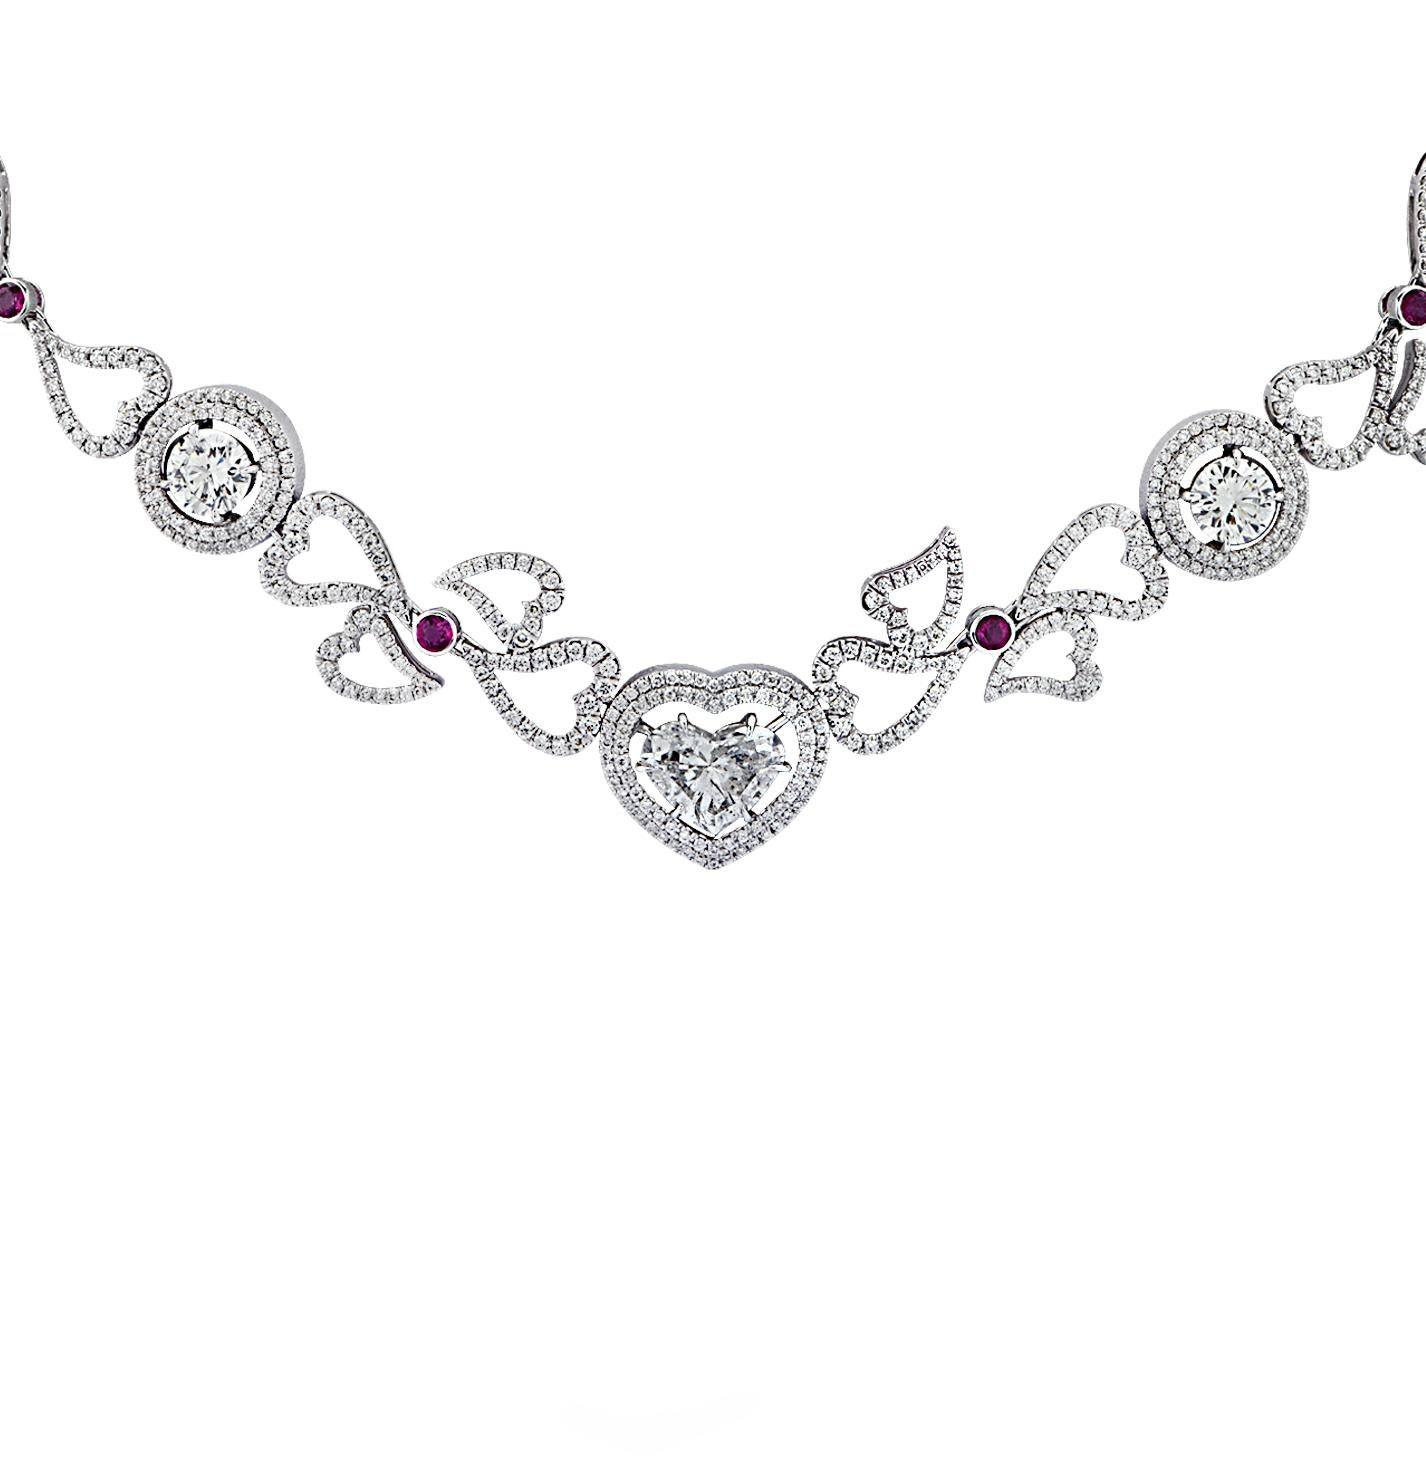 Sensational necklace crafted in 18 karat white gold showcasing a spectacular heart shape diamond weighing approximately 2.88 carats, G color, SI clarity, 3 GIA certified round brilliant cut diamonds weighing 2.44 carats total, H-I color, VS-SI